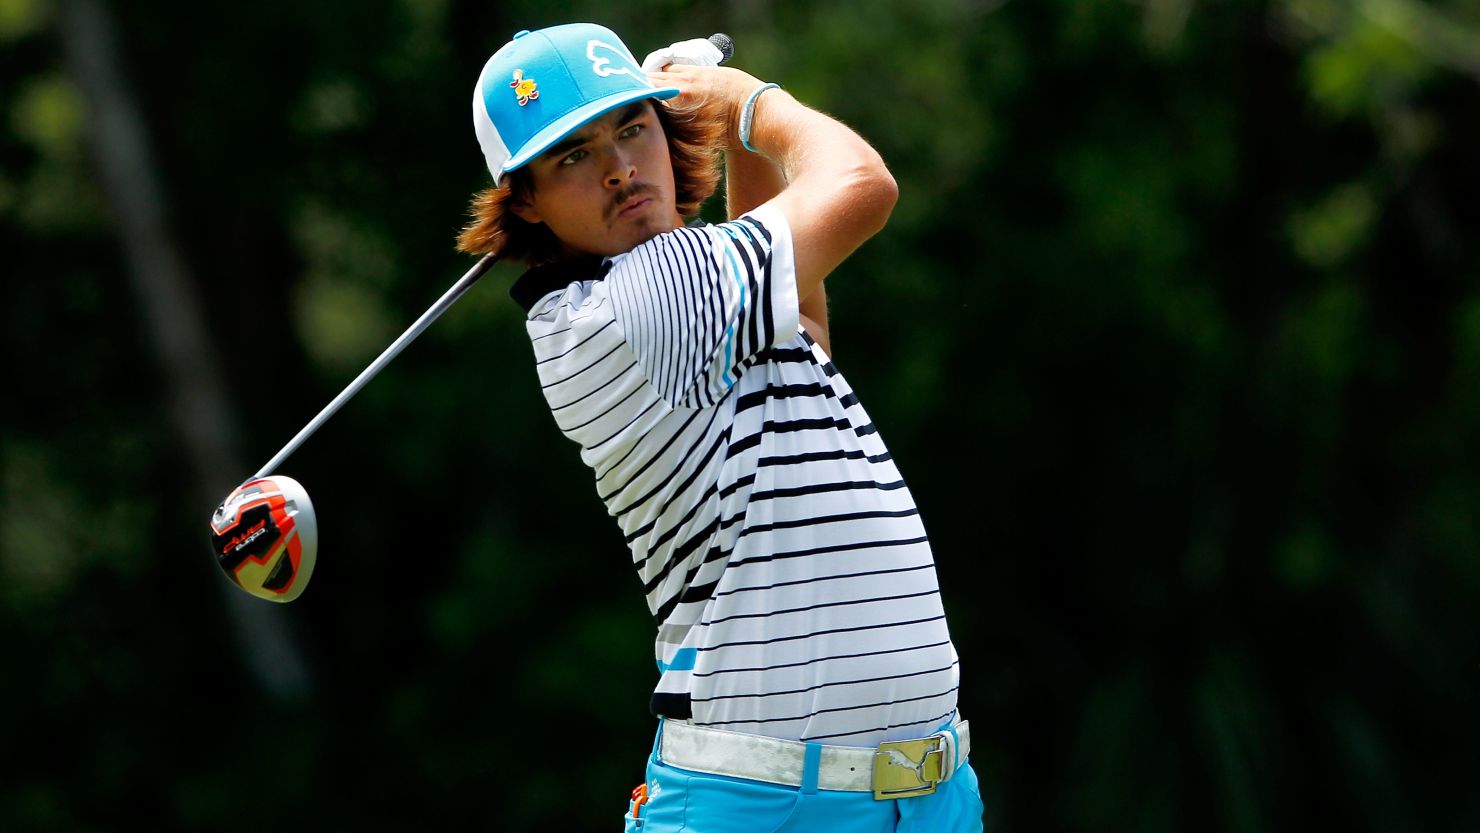 Former rookie of the year Rickie Fowler won at Quail Hollow last week for his first PGA Tour title 